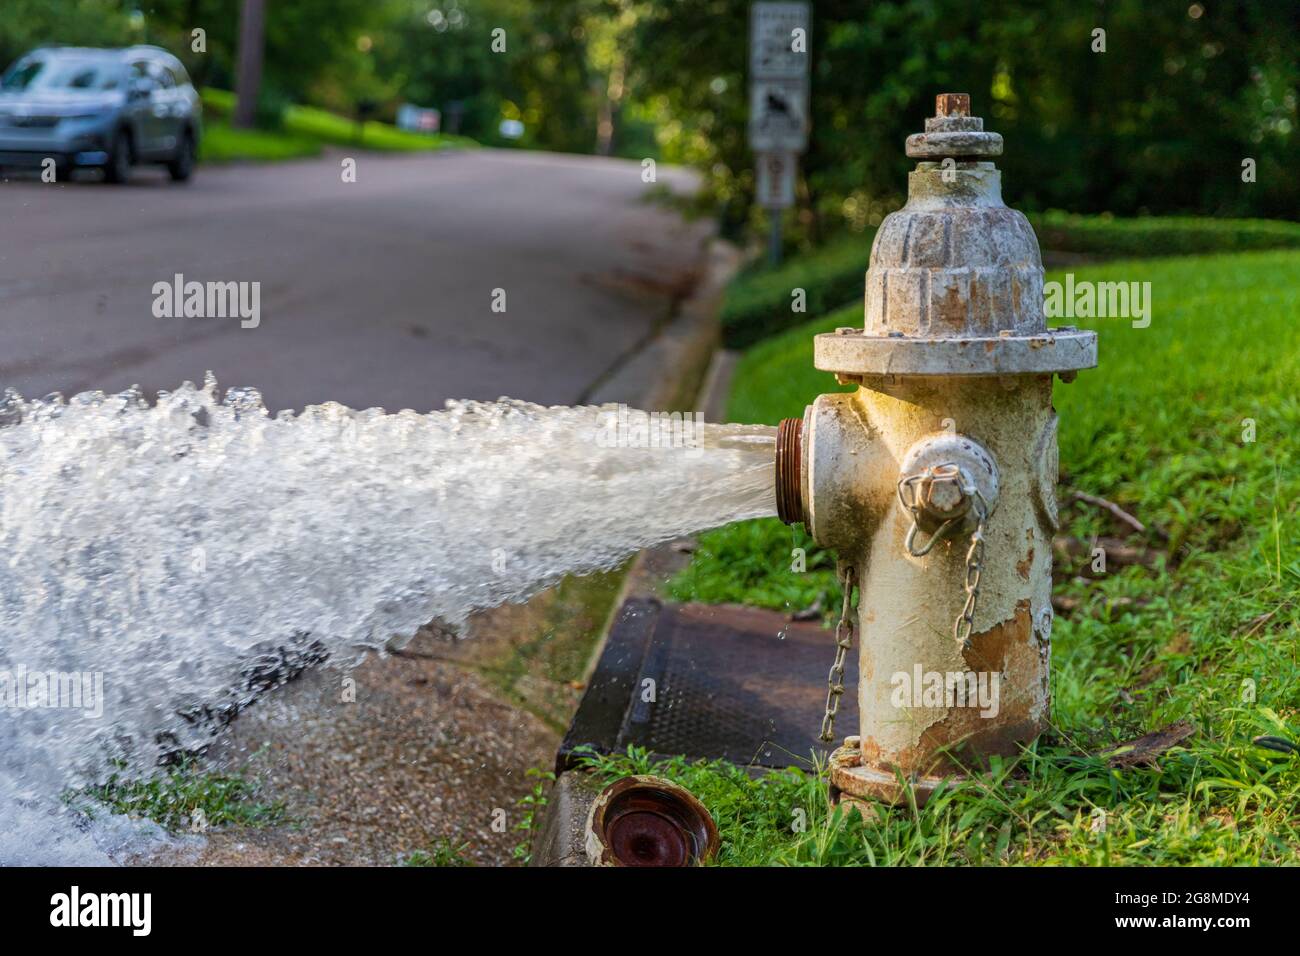 Water Flowing from open Fire Hydrant Stock Photo